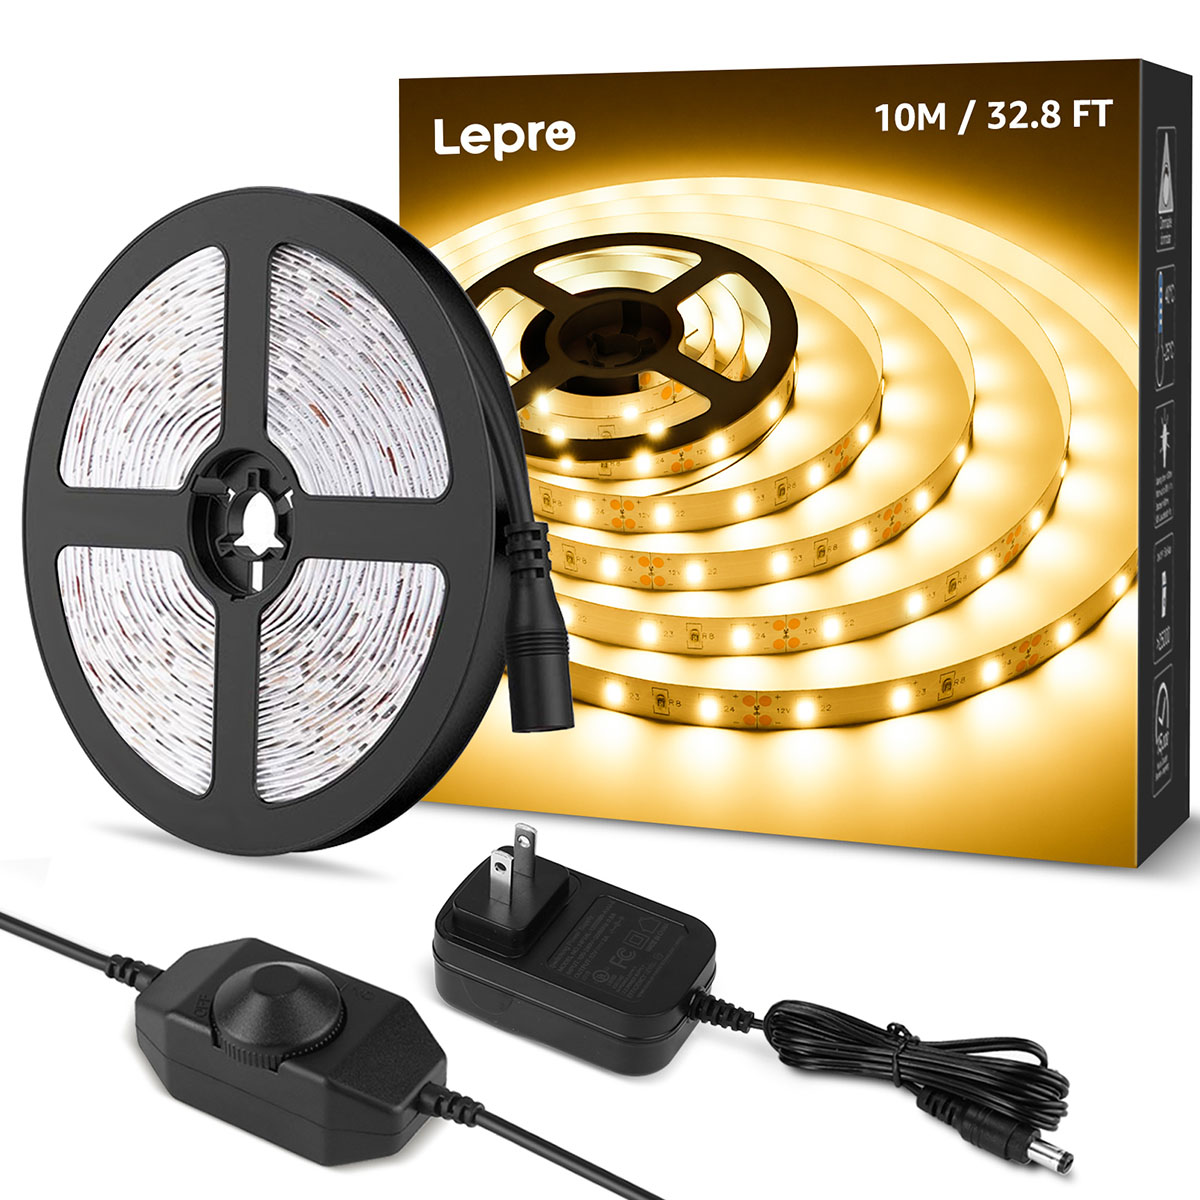 Lepro 12V LED Strip Light, Flexible, SMD 2835, 300 LEDs, 32.8ft Tape Light  for Home, Kitchen, Party, Christmas and More, Non-Waterproof, Warm White